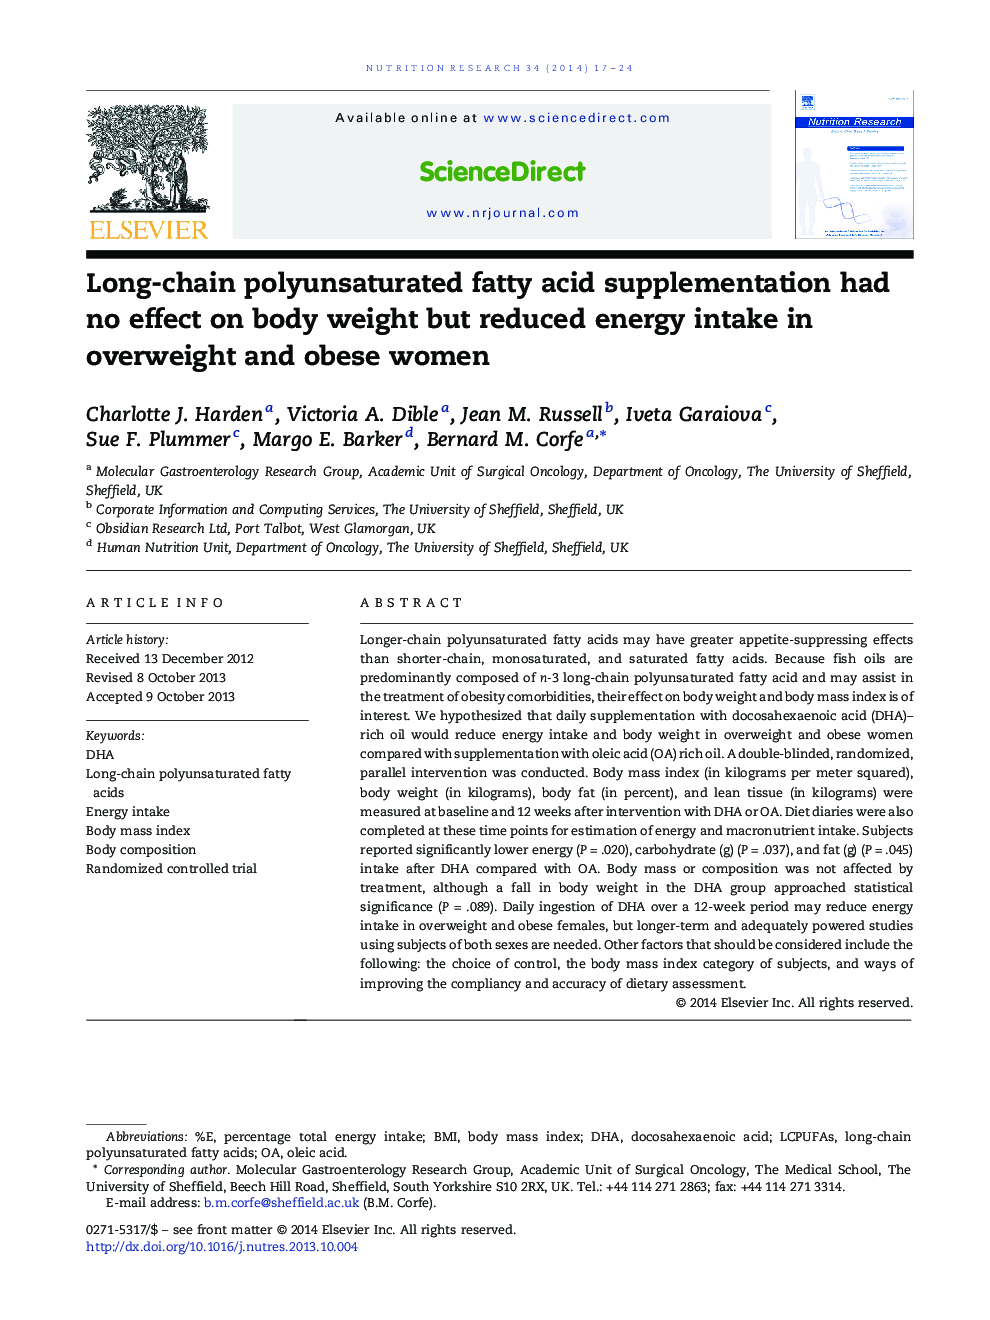 Long-chain polyunsaturated fatty acid supplementation had no effect on body weight but reduced energy intake in overweight and obese women